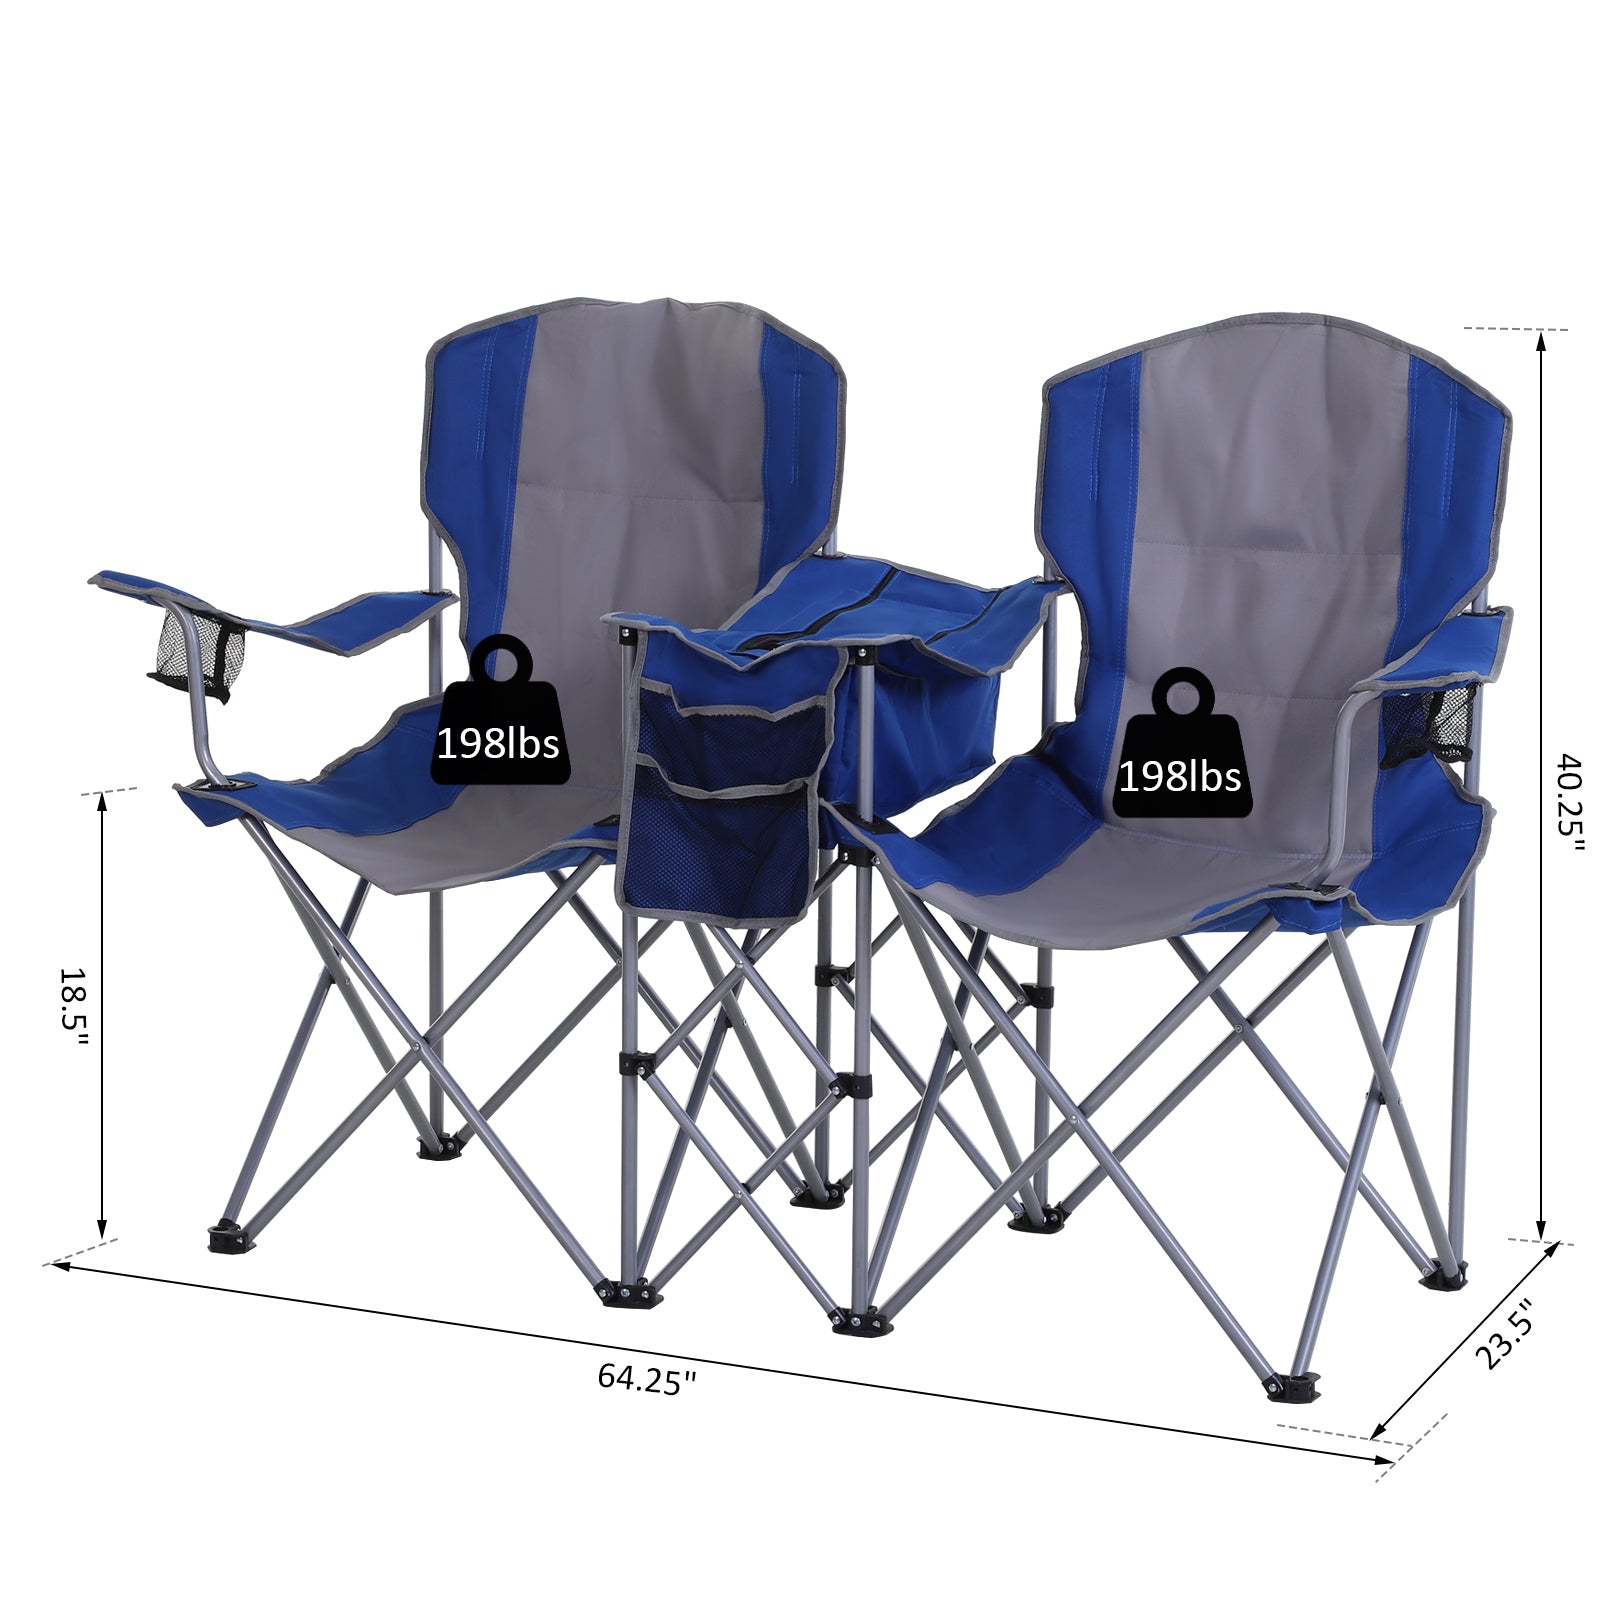 2-Person Folding Oxford Metal Portable Camping Chair with Center Ice Bag Included Magazine Sleeve - Blue